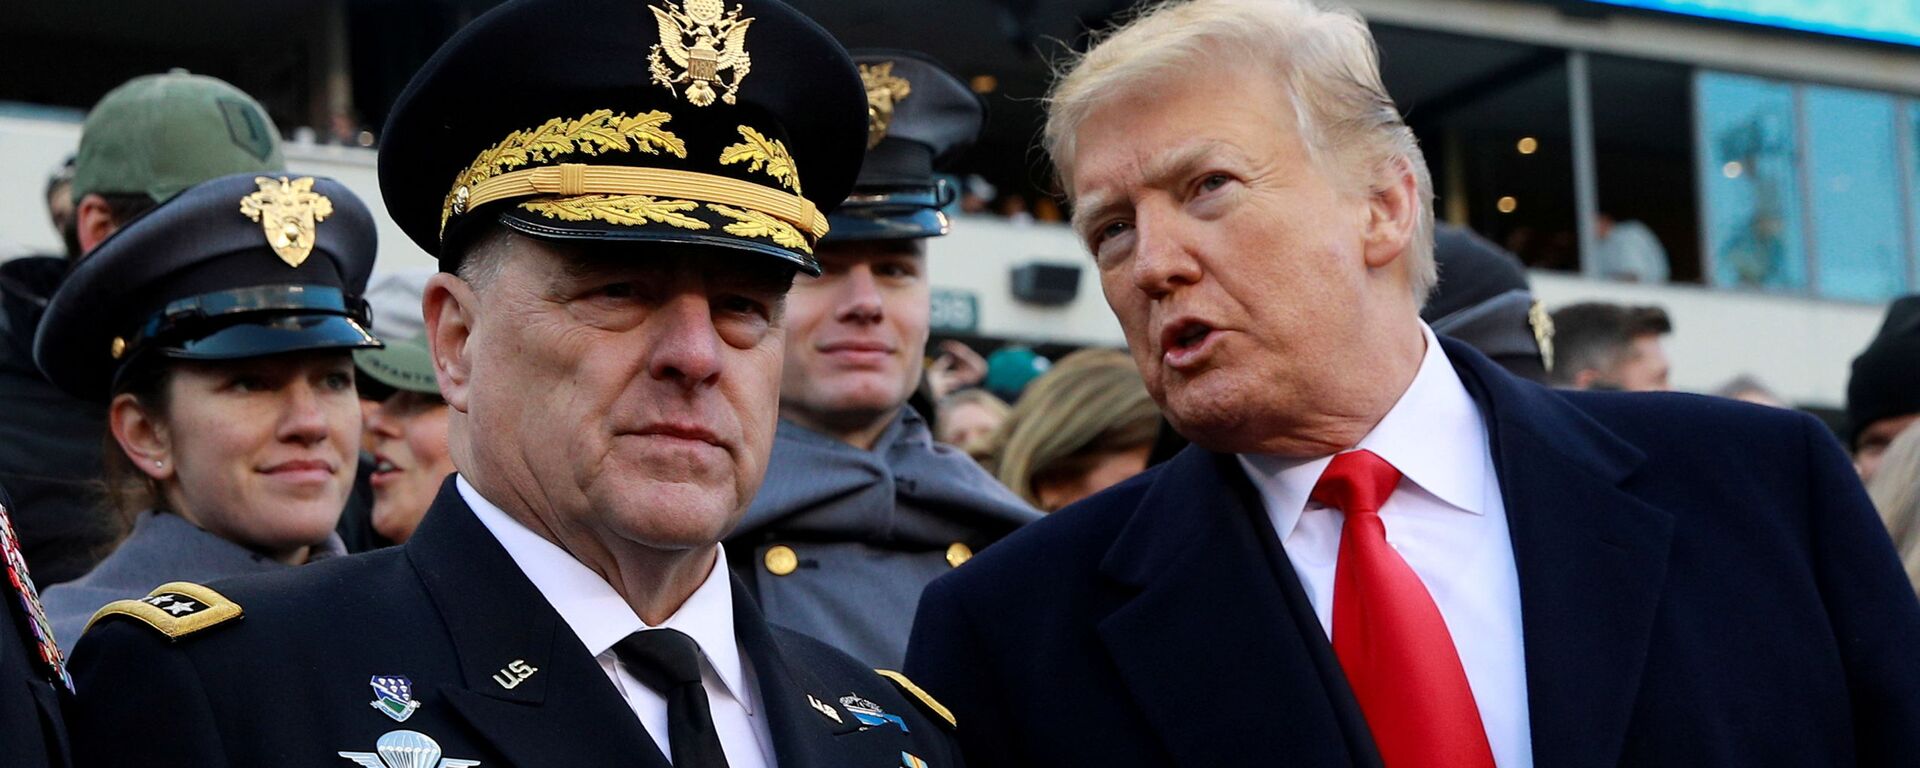  U.S. President Donald Trump and Gen. Mark Milley, Chief of Staff of the United States Army, speak at the 119th Army-Navy football game at Lincoln Financial Field in Philadelphia, Pennsylvania, U.S. December 8, 2018 - Sputnik International, 1920, 19.09.2021